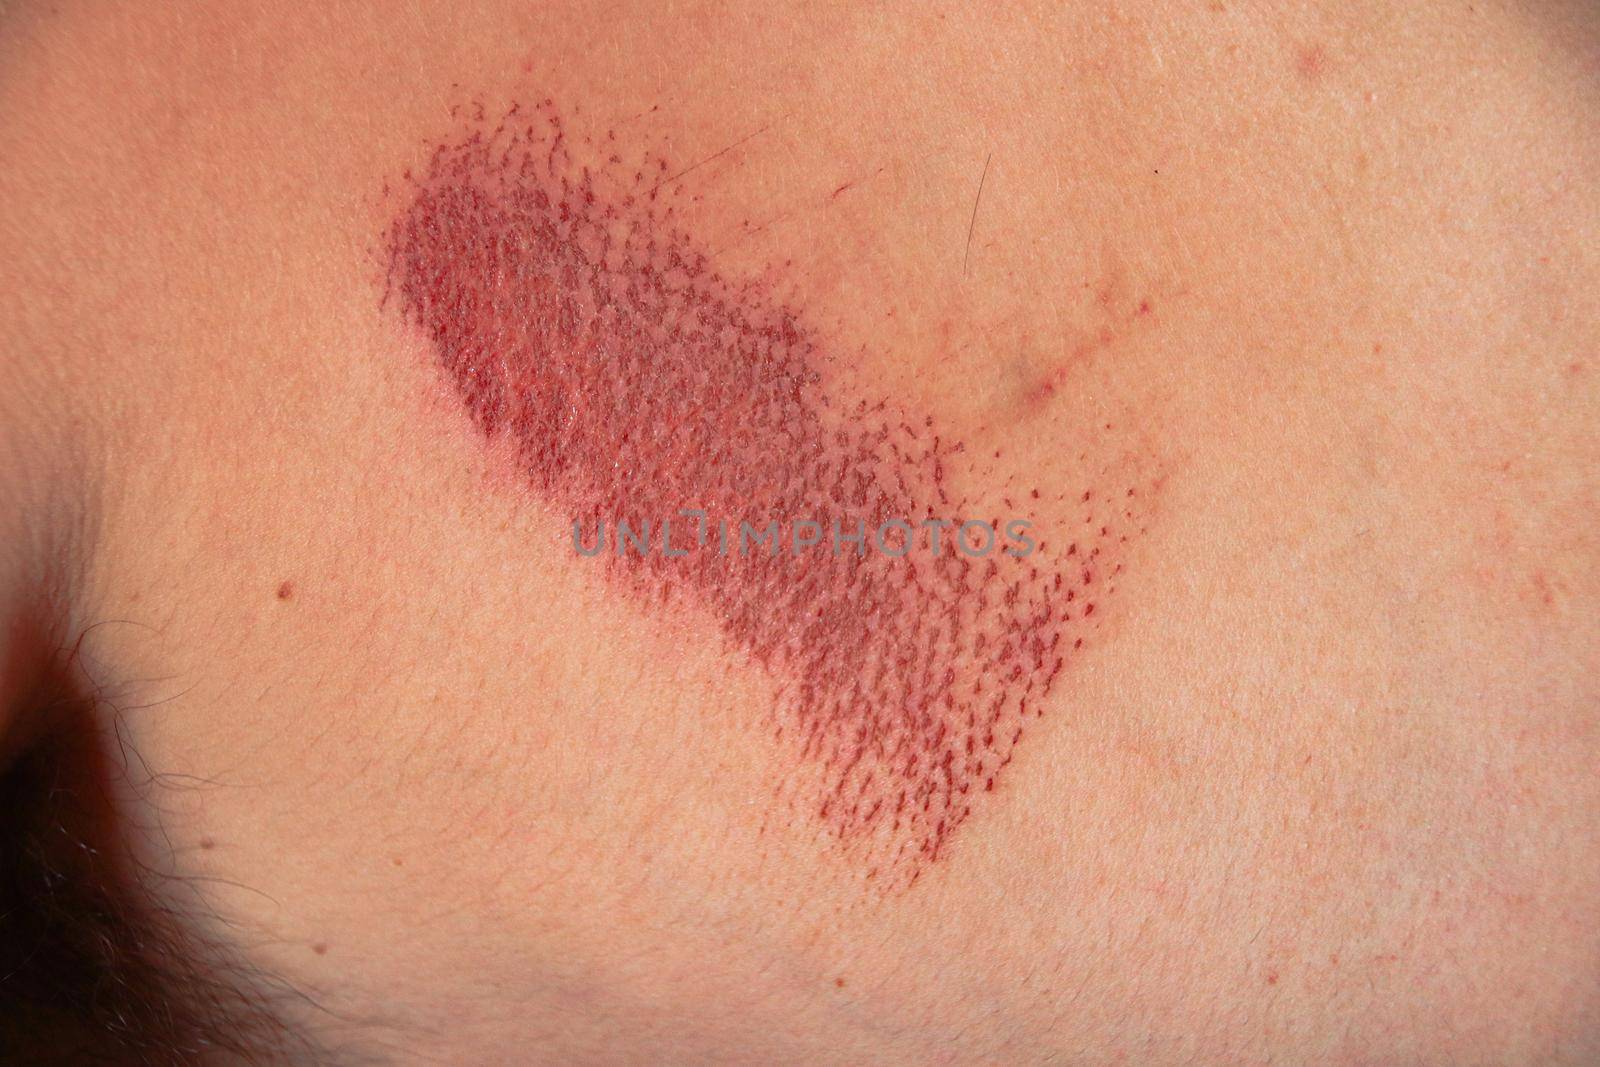 Close up of an abrasion wound in Caucasian skin